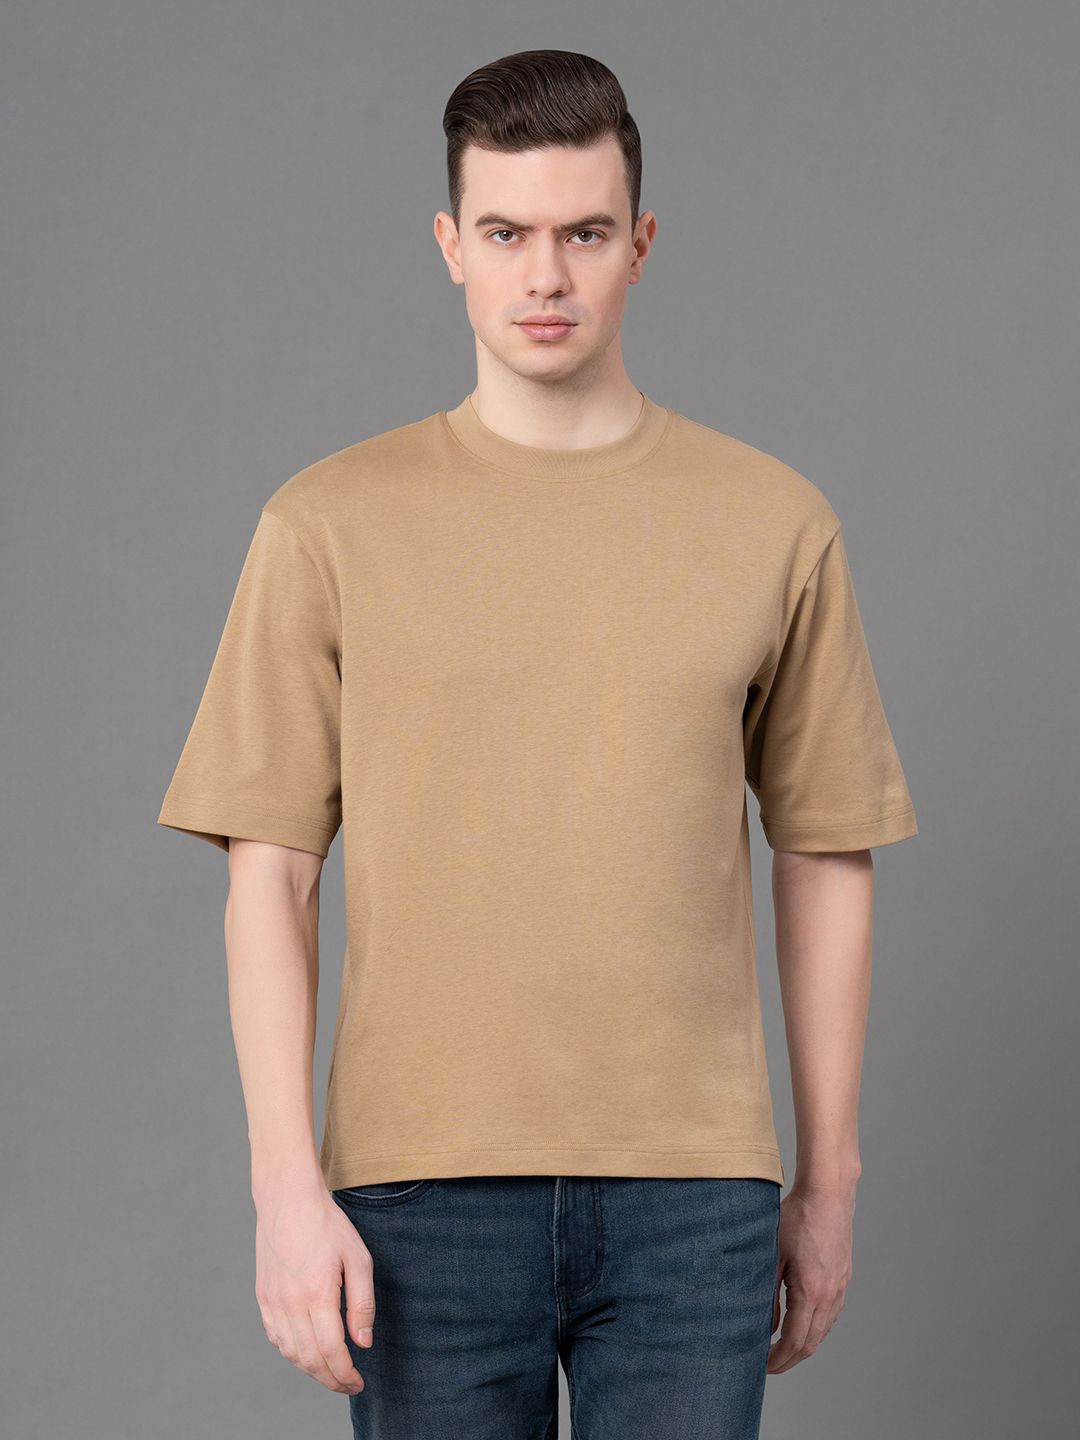     			Red Tape Cotton Blend Oversized Fit Solid Half Sleeves Men's T-Shirt - Brown ( Pack of 1 )